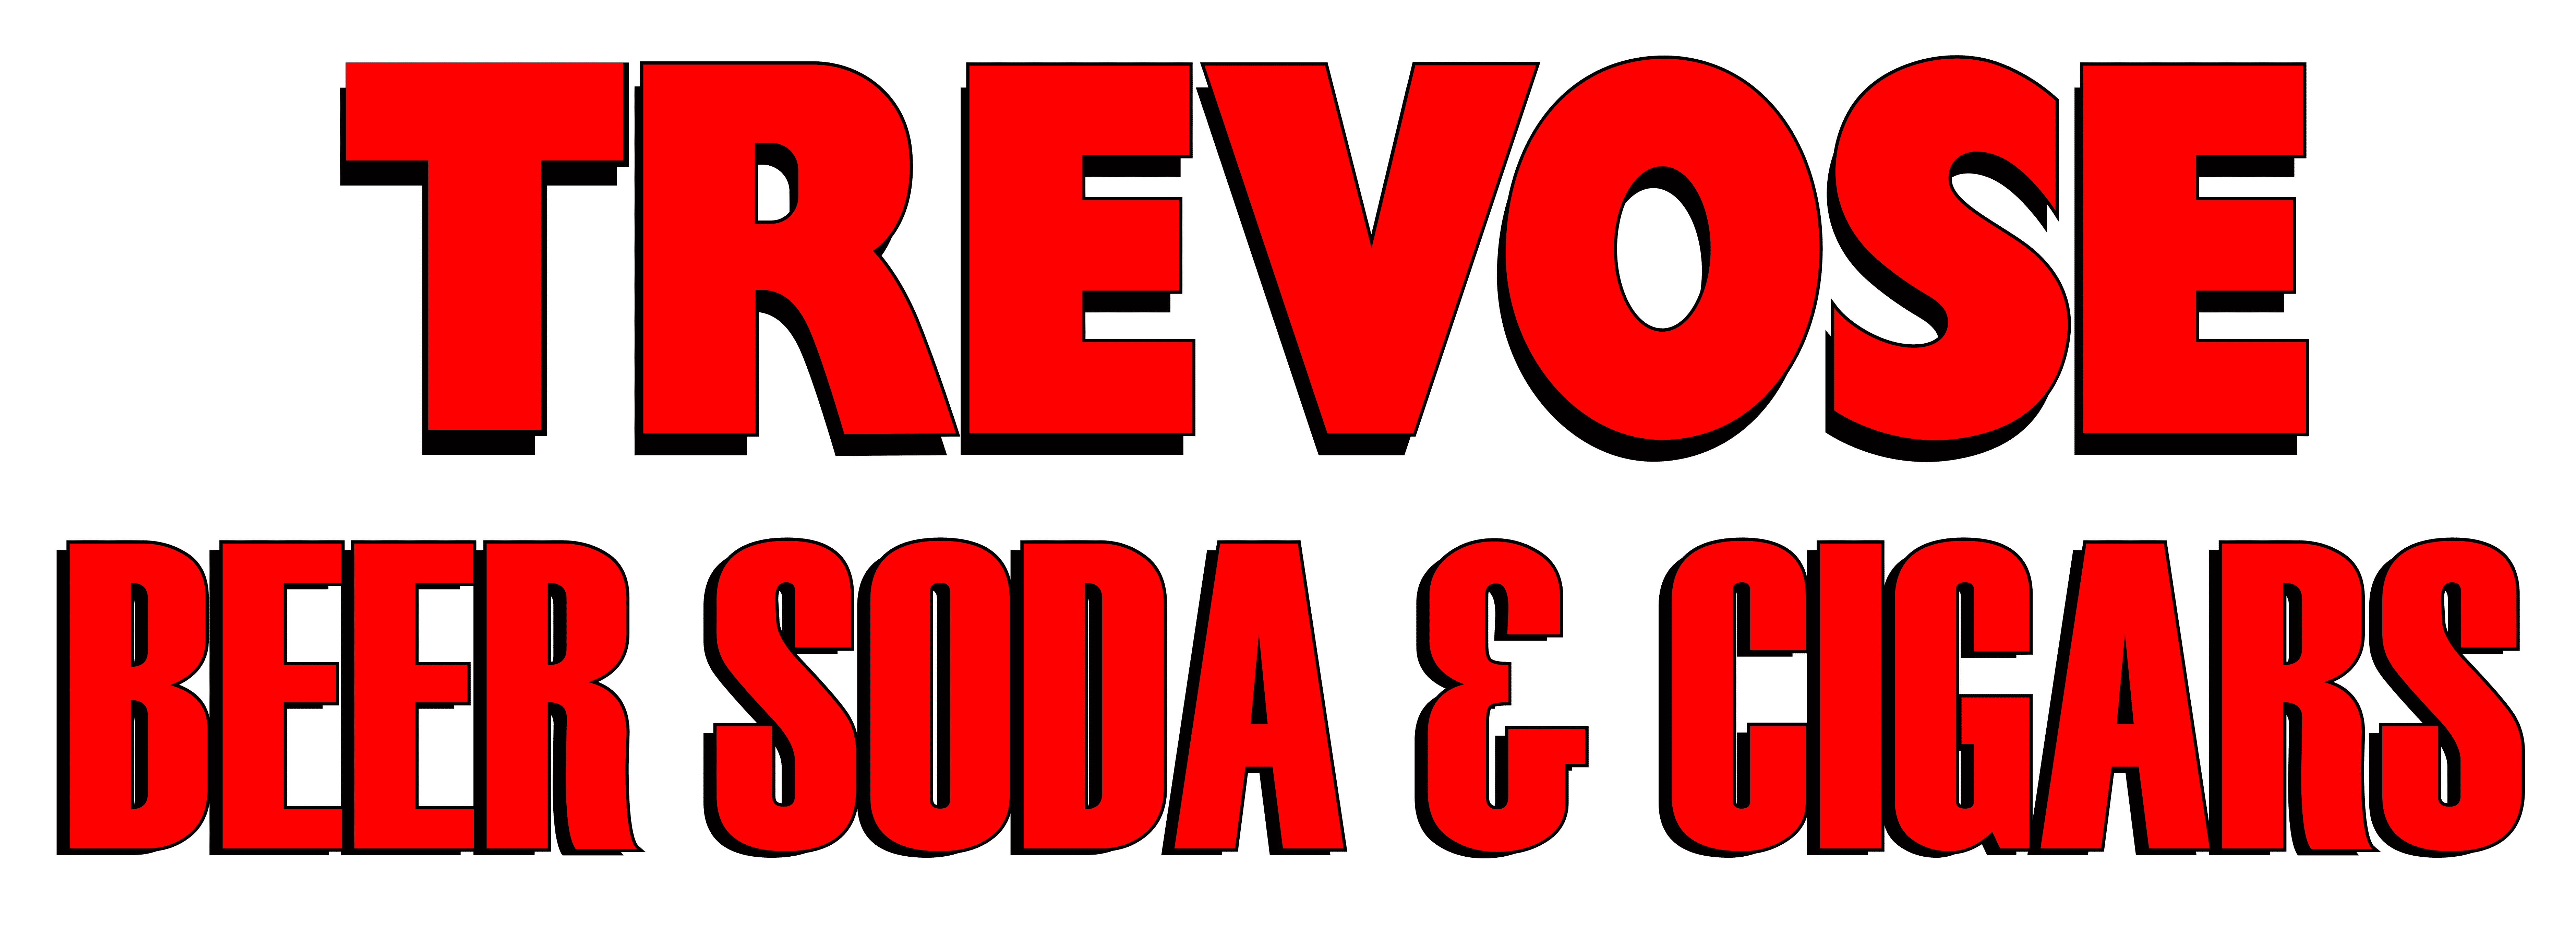 A Sign With The Words "trevose Beer Soda & Cigars" In Bold Red Capital Letters On A Black Background.